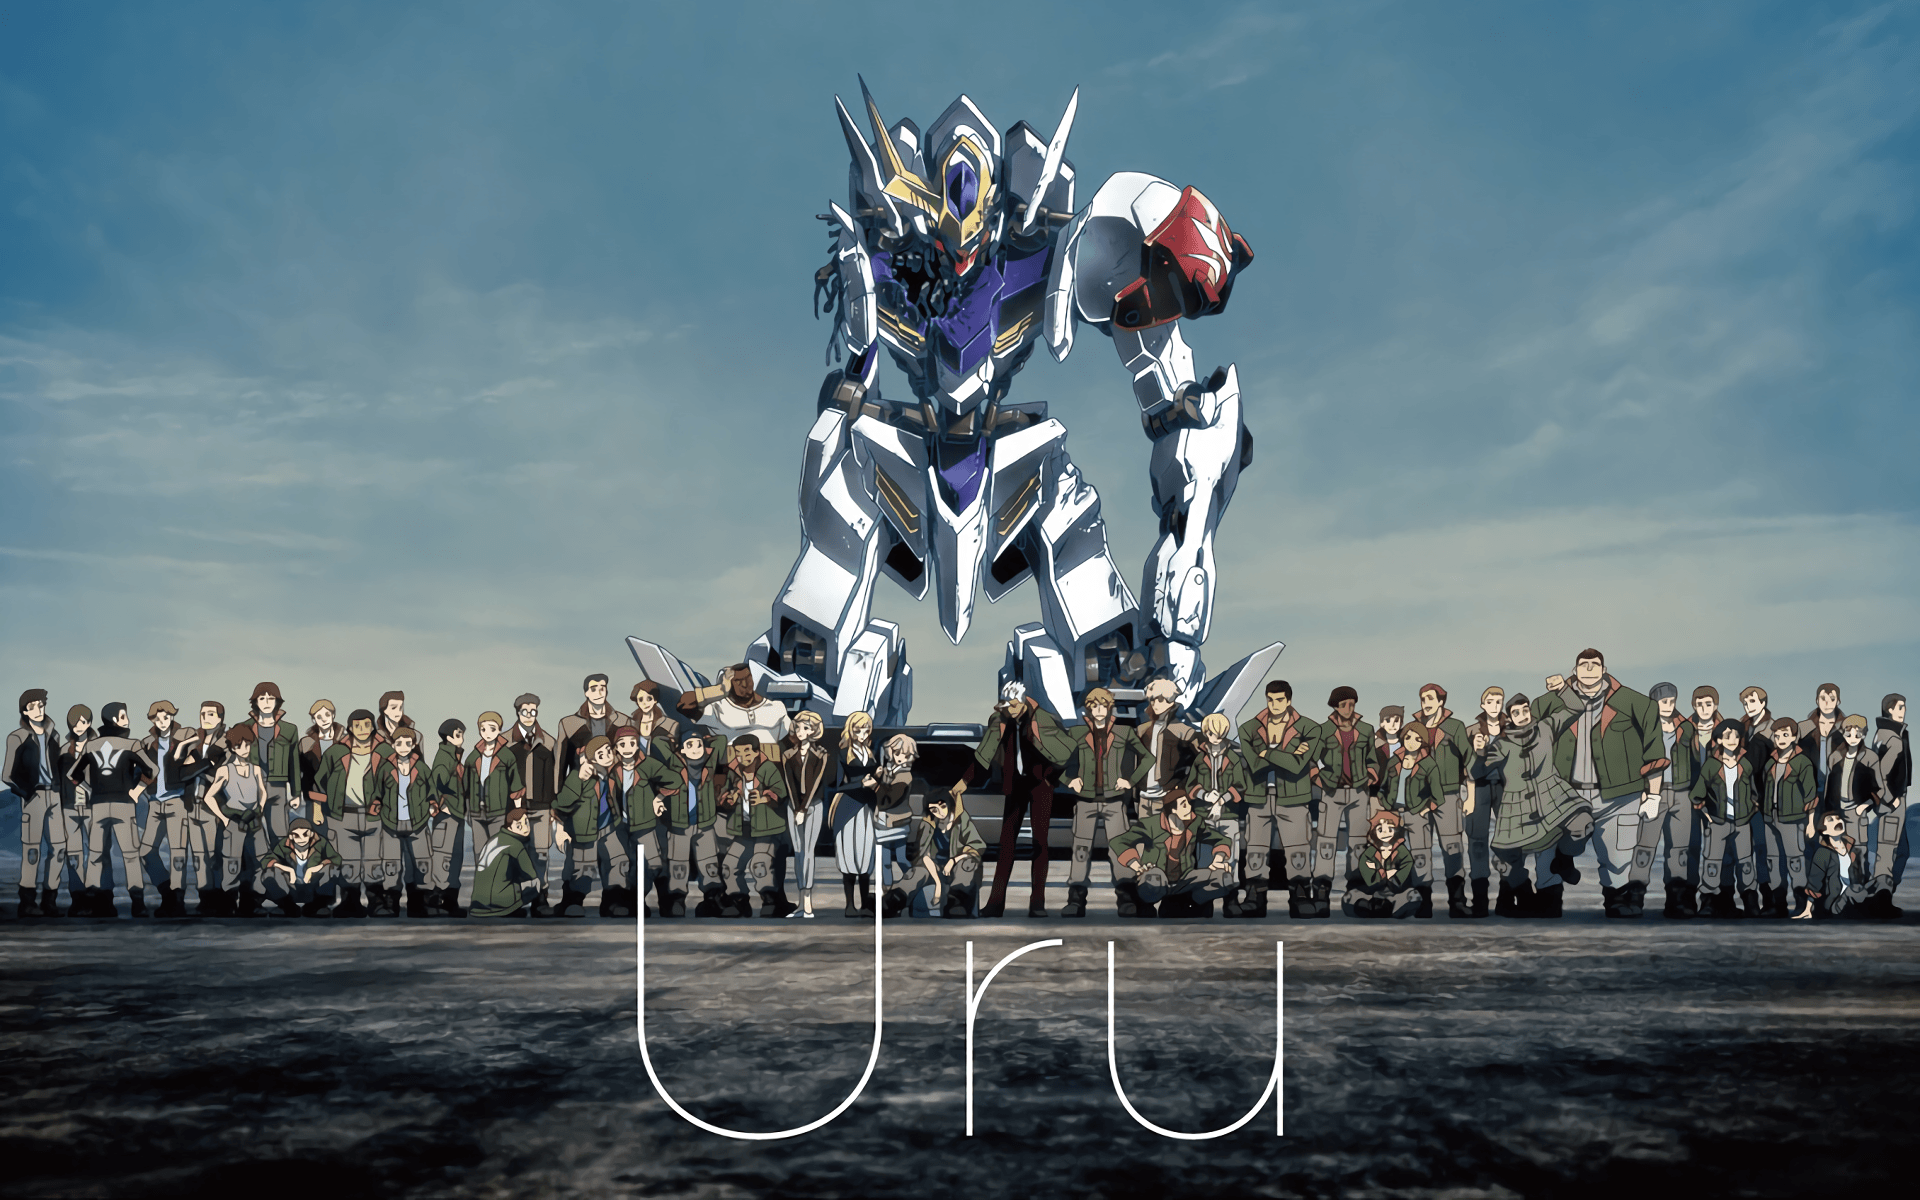 Mobile Suit Gundam: Iron Blooded Orphans HD Wallpaper